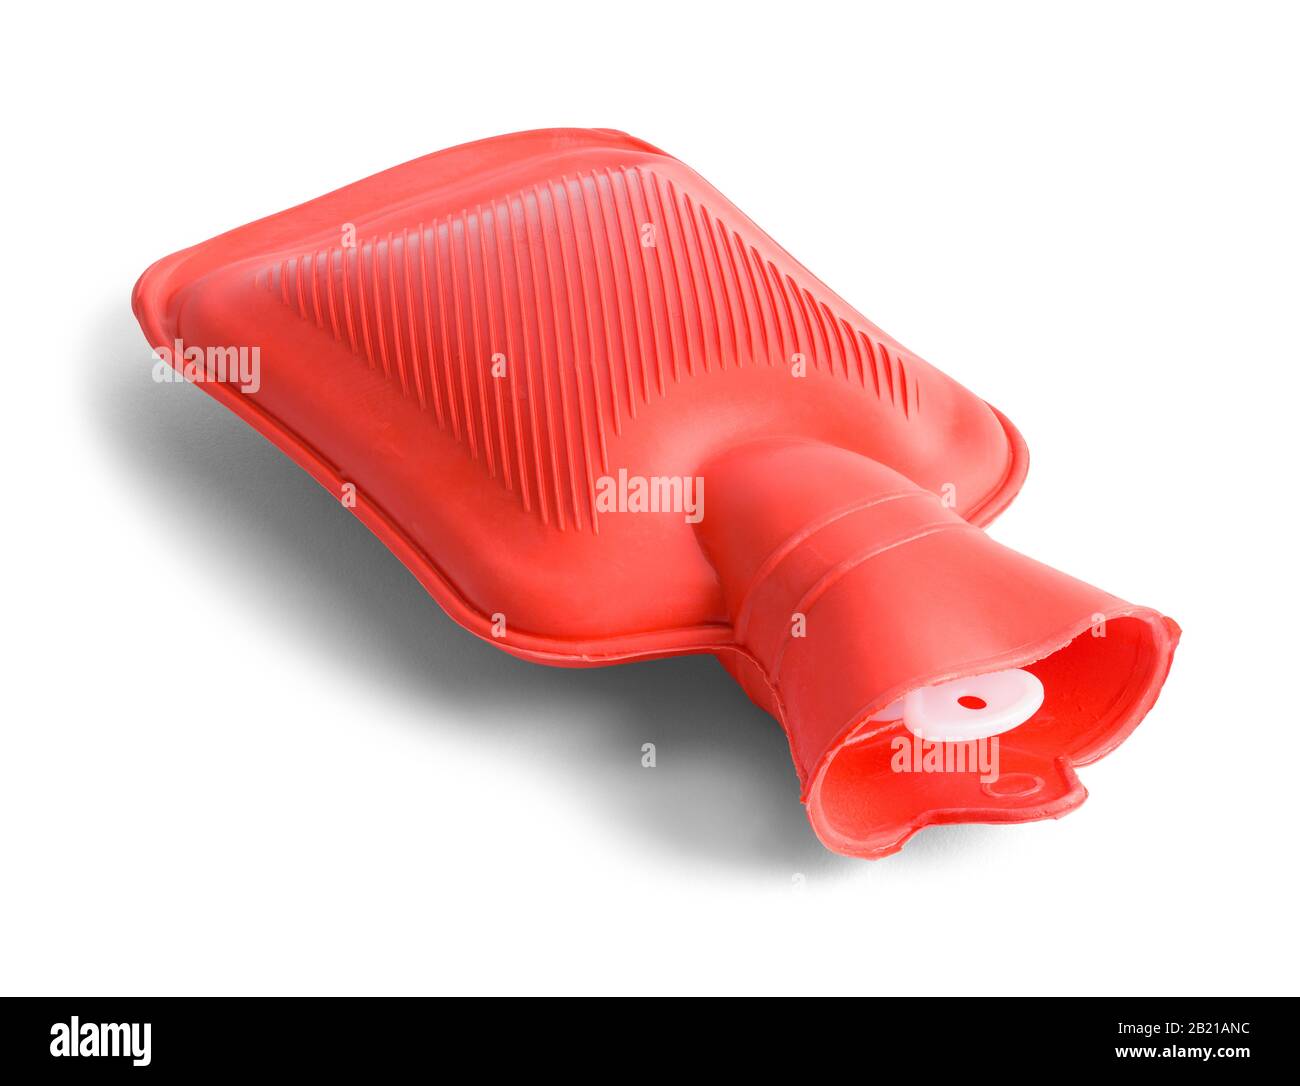 Red Rubber Hot Water Bag Isolated on White Background. Stock Photo